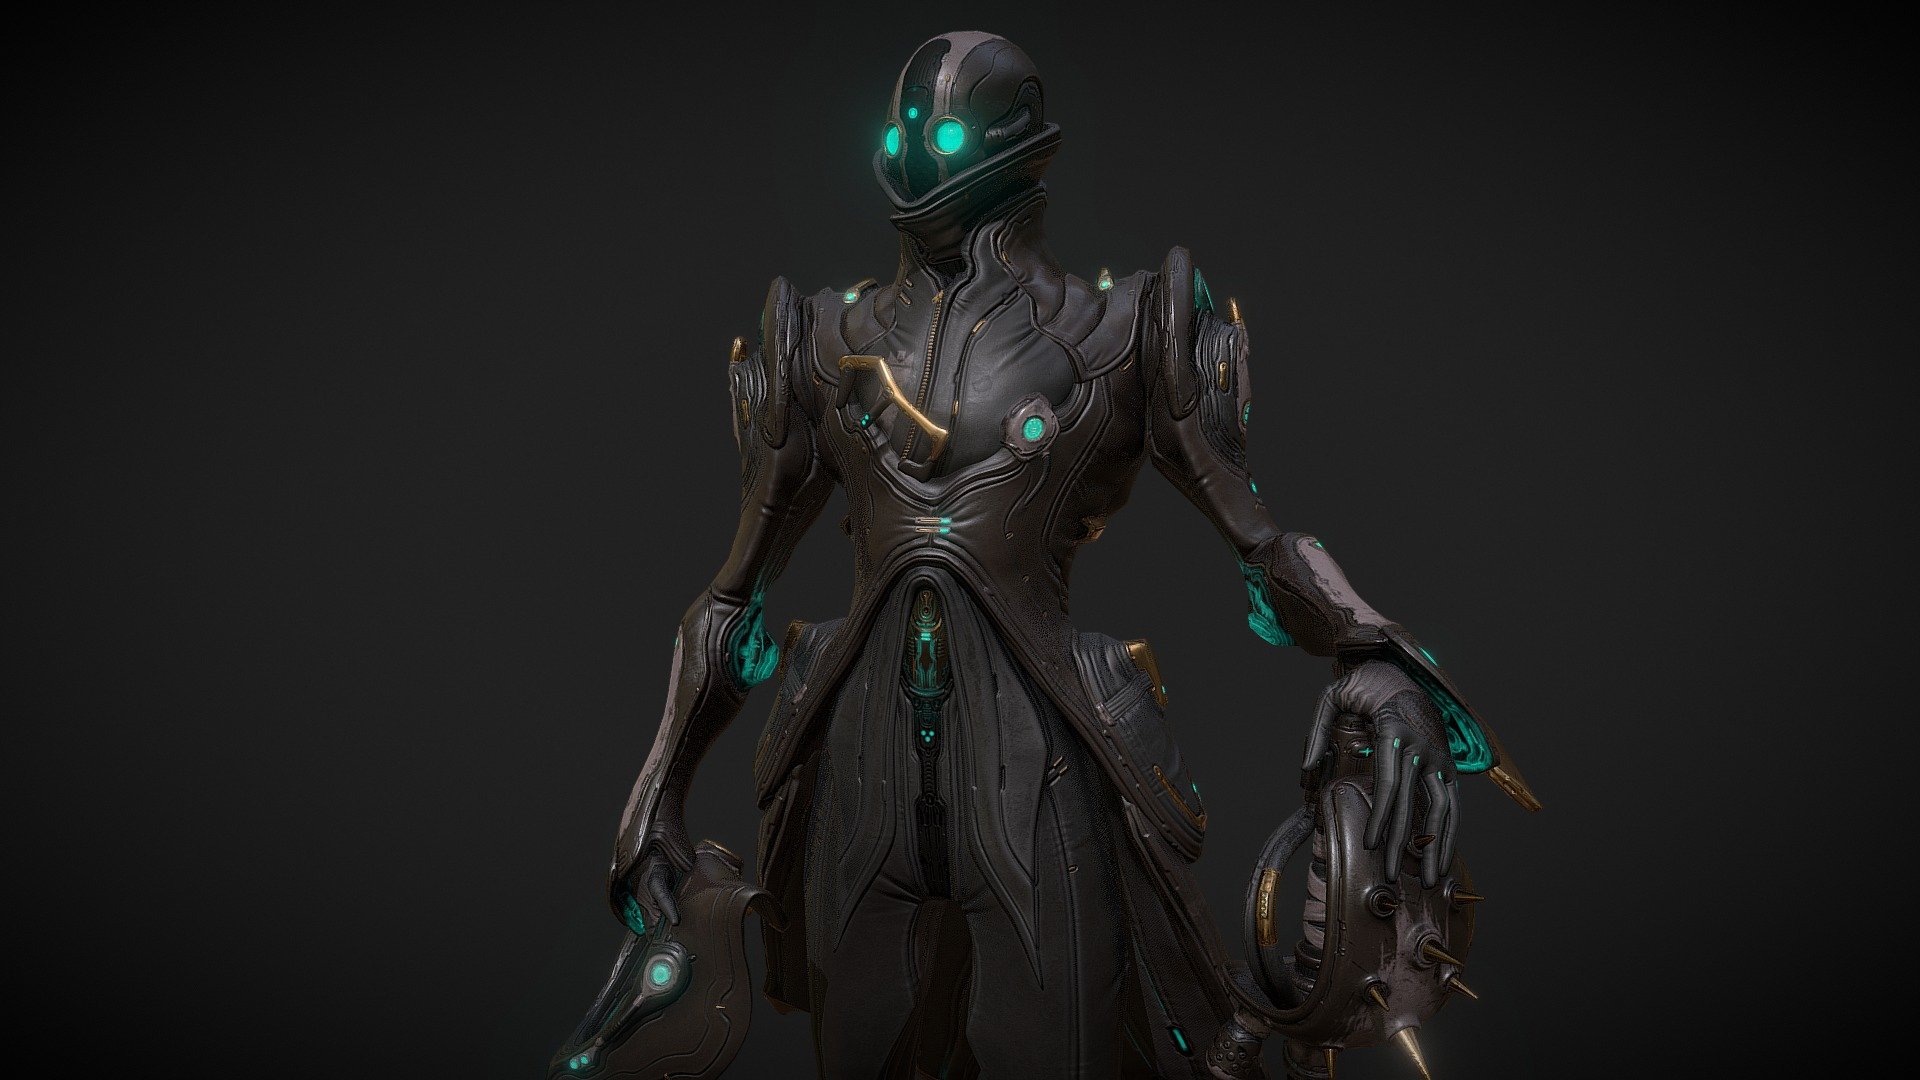 Reskinned low poly and custom helmet(s) for warframe.

Also made a quick rapier 3d model